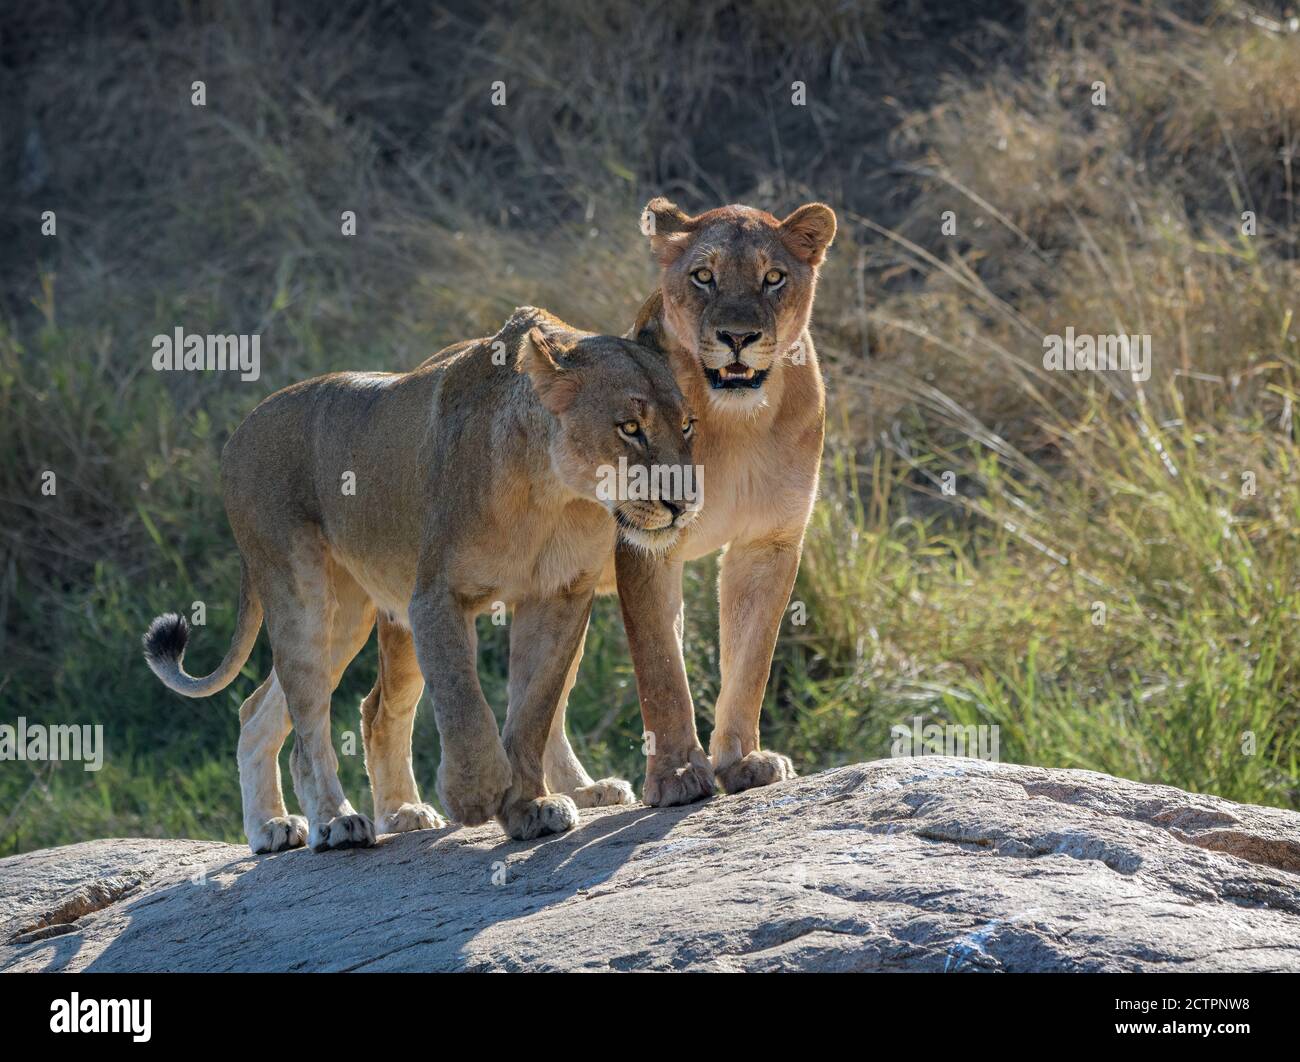 Two Lionesses standing on a rock in soft light making eye contact with viewer Stock Photo